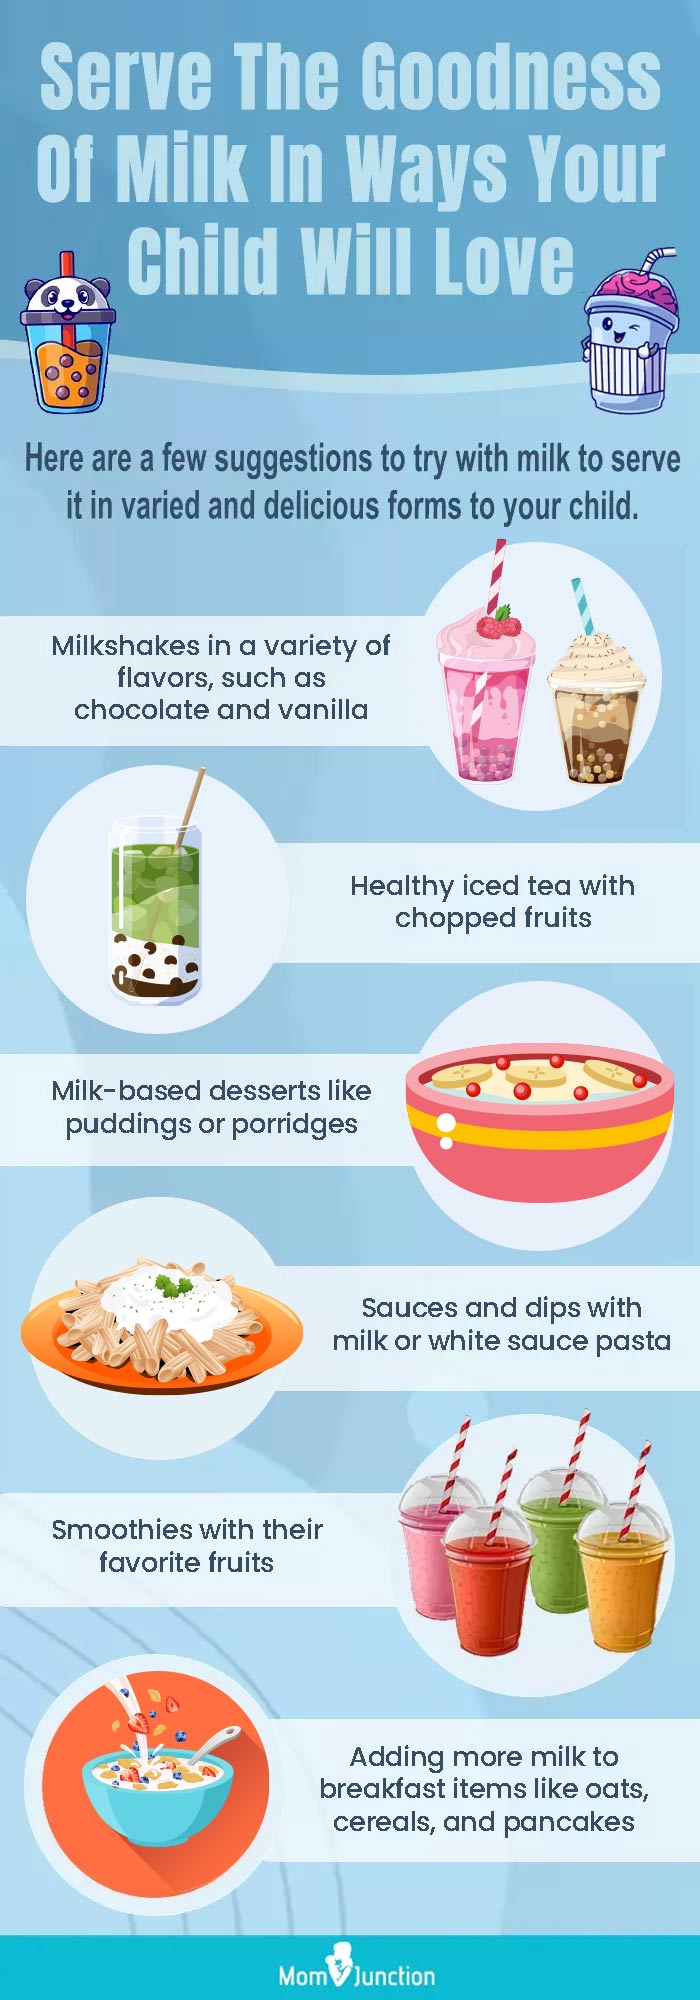 serve the goodness of milk in ways your child will love (infographic)